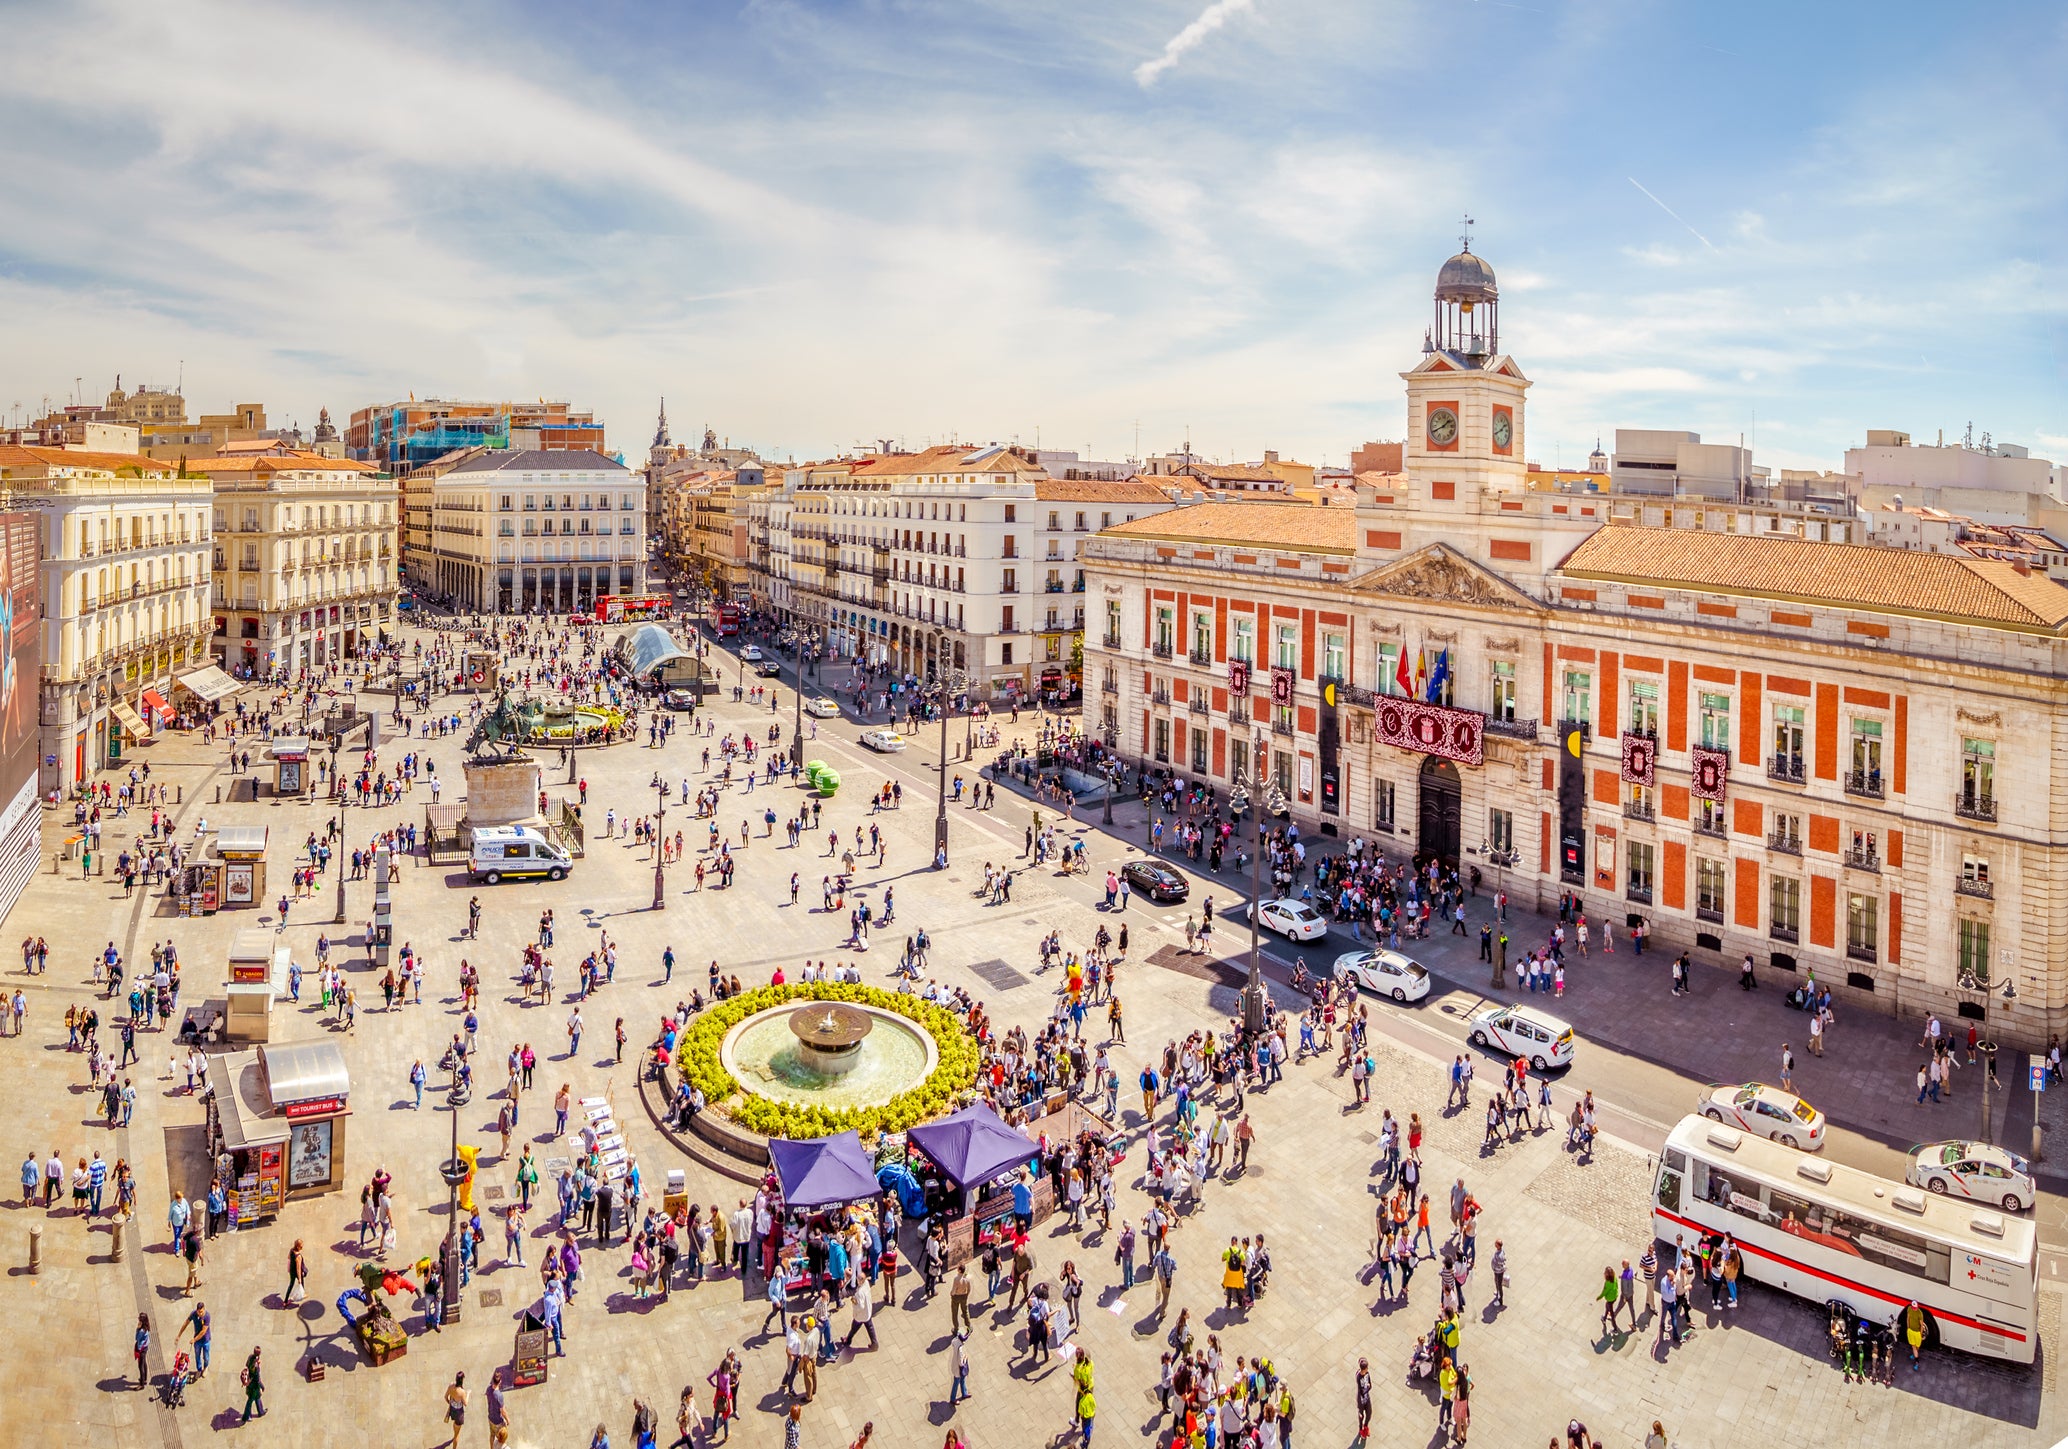 Puerta del Sol square in Madrid, a great start for navigating the city (Getty/iStock)